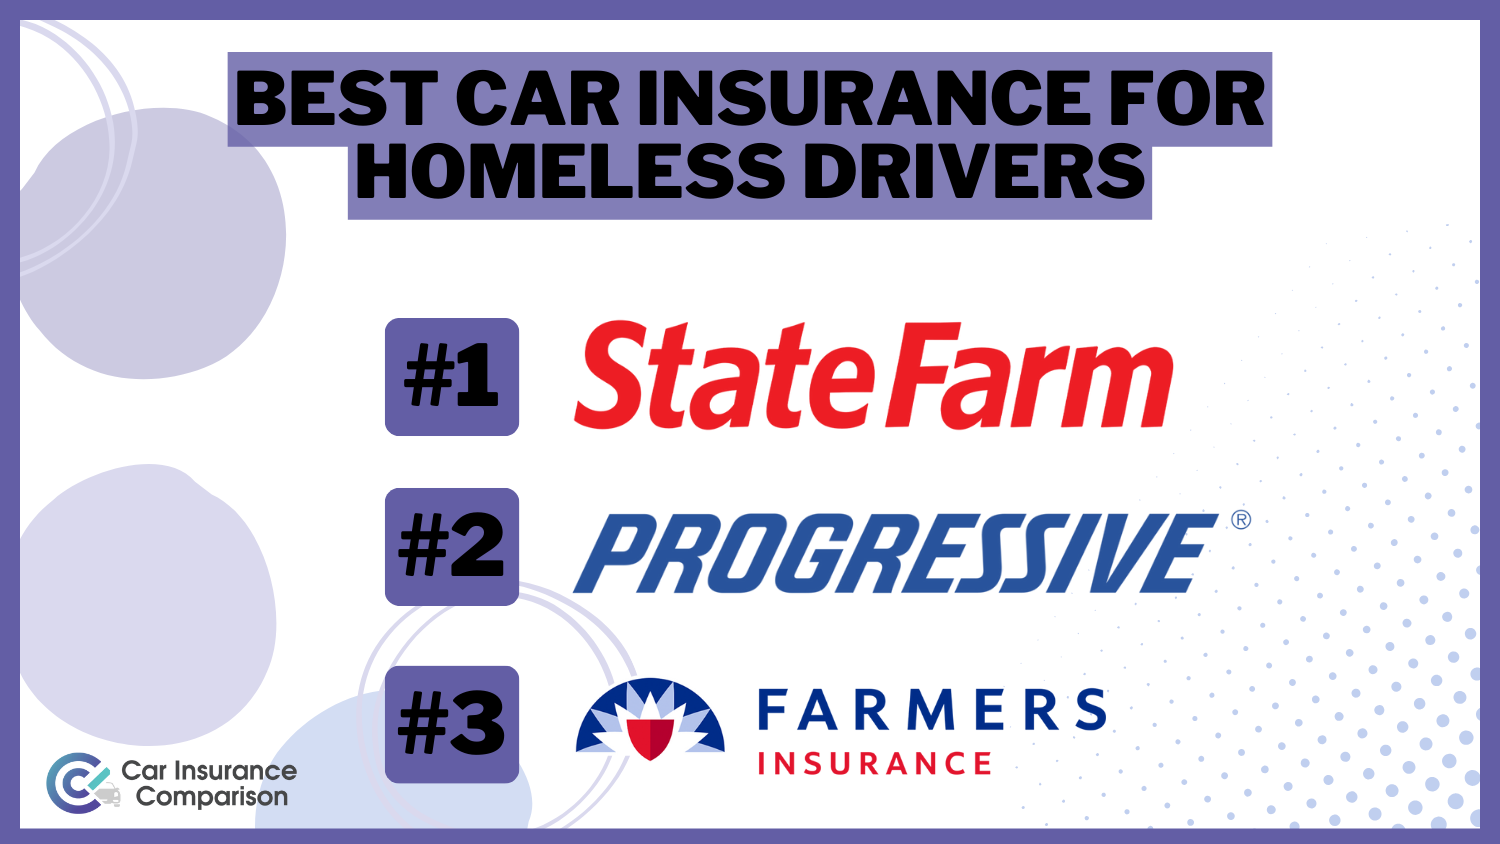 3 Best Car Insurance for Homeless Drivers: State Farm, Progressive, and Farmers.